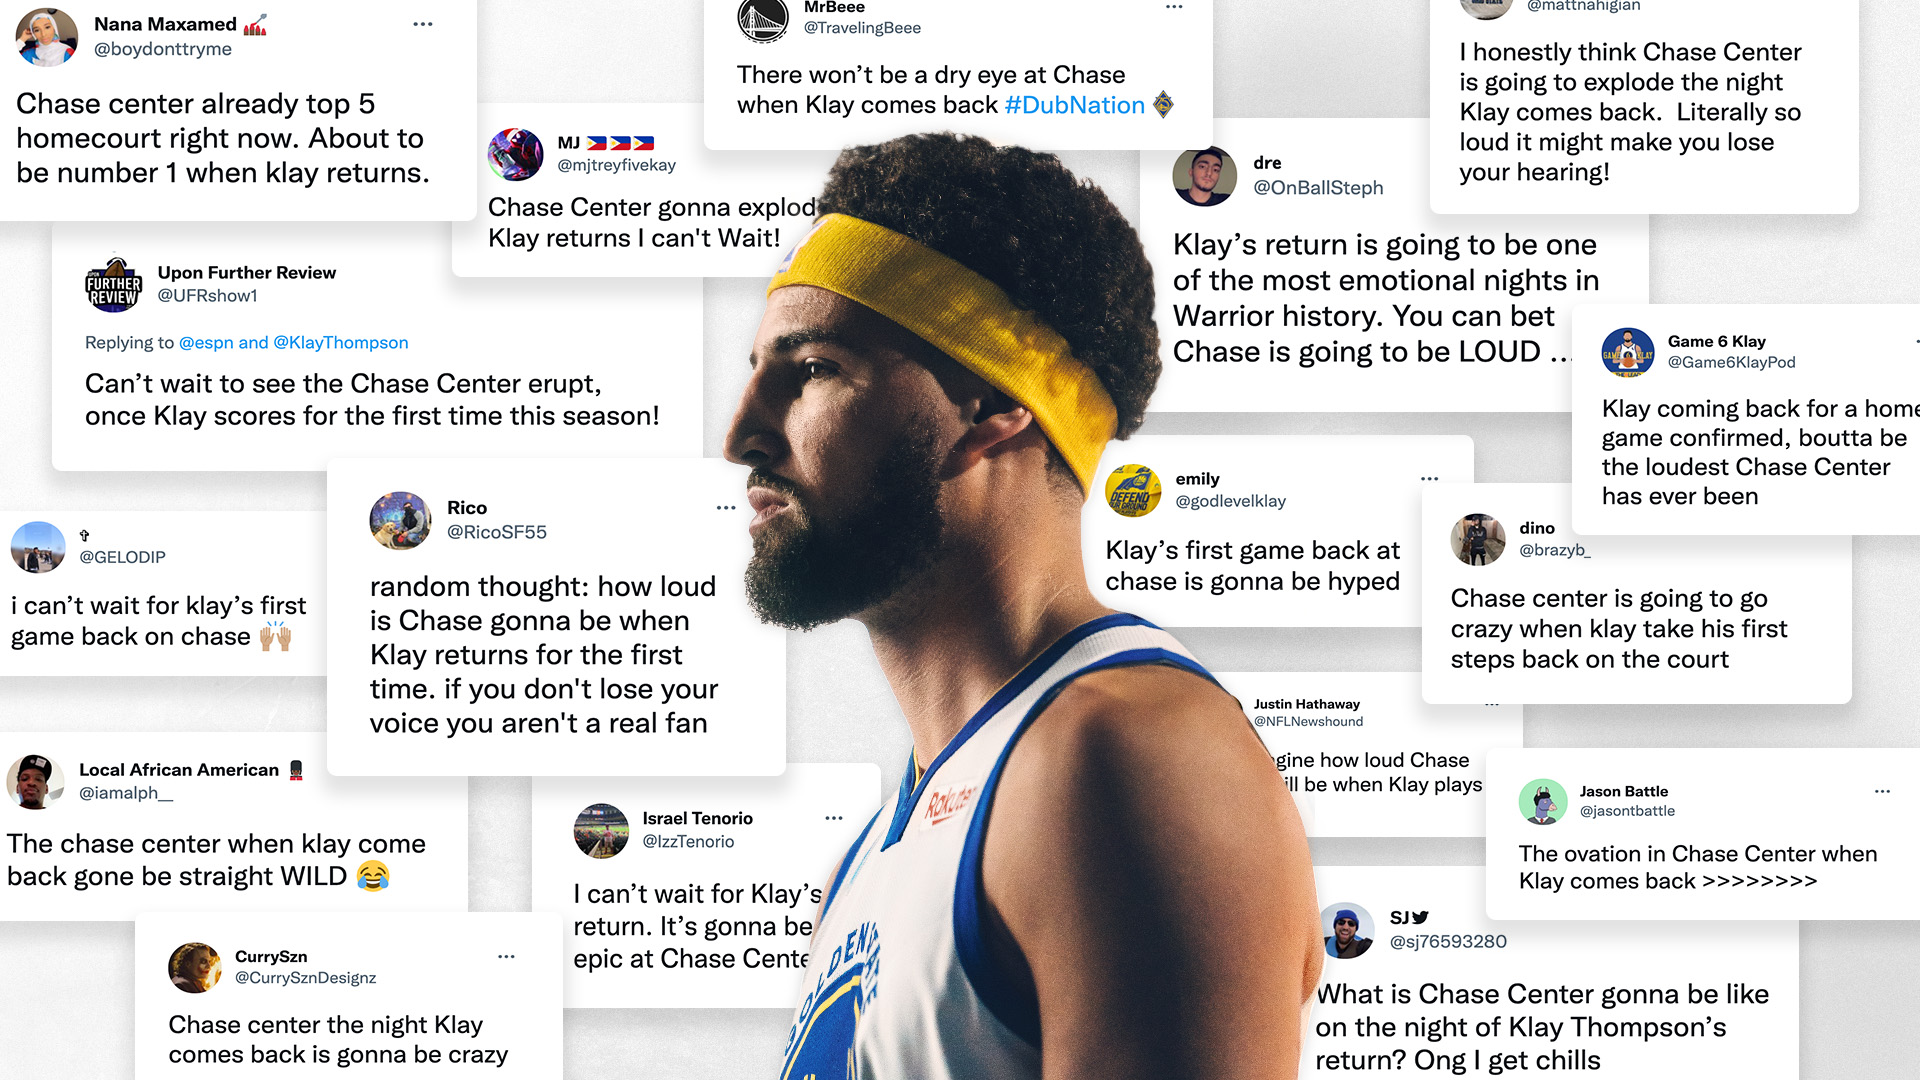 Golden-State-Warriors-and-Chase-Center-Celebrate-Klay Day 